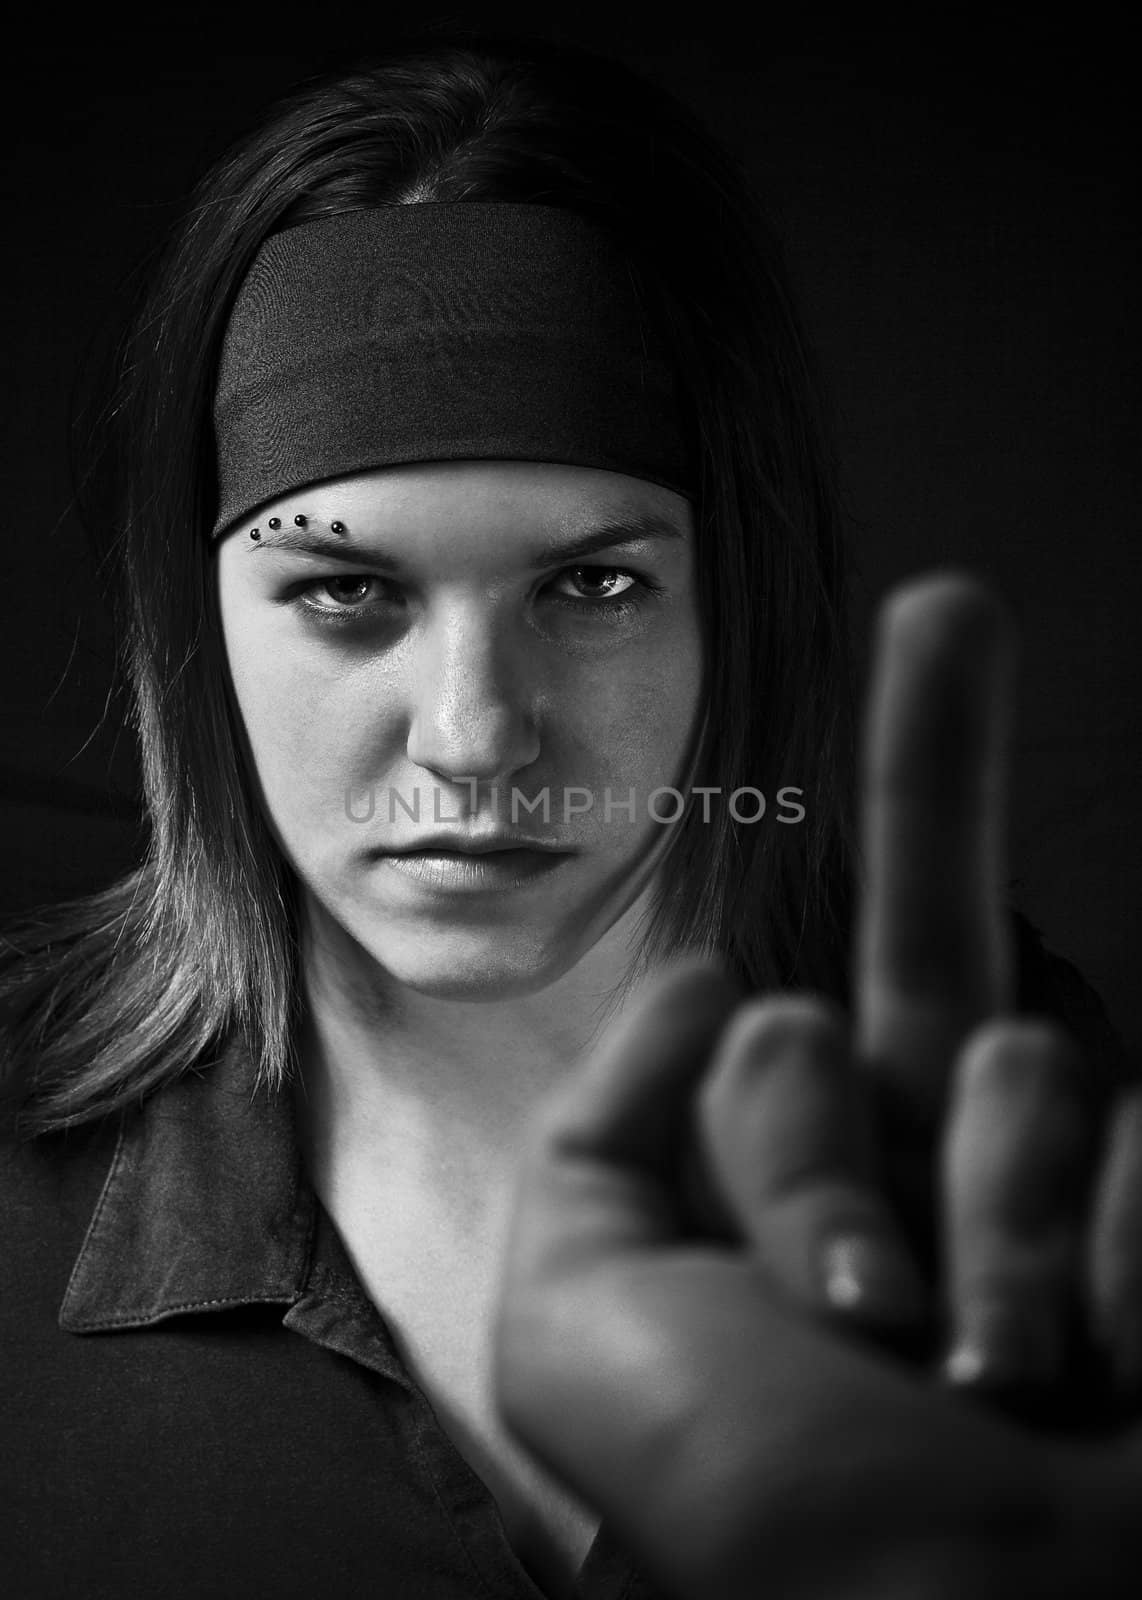 Girl ignoring a middle finger gesture and aggresively staring back (in black and white).